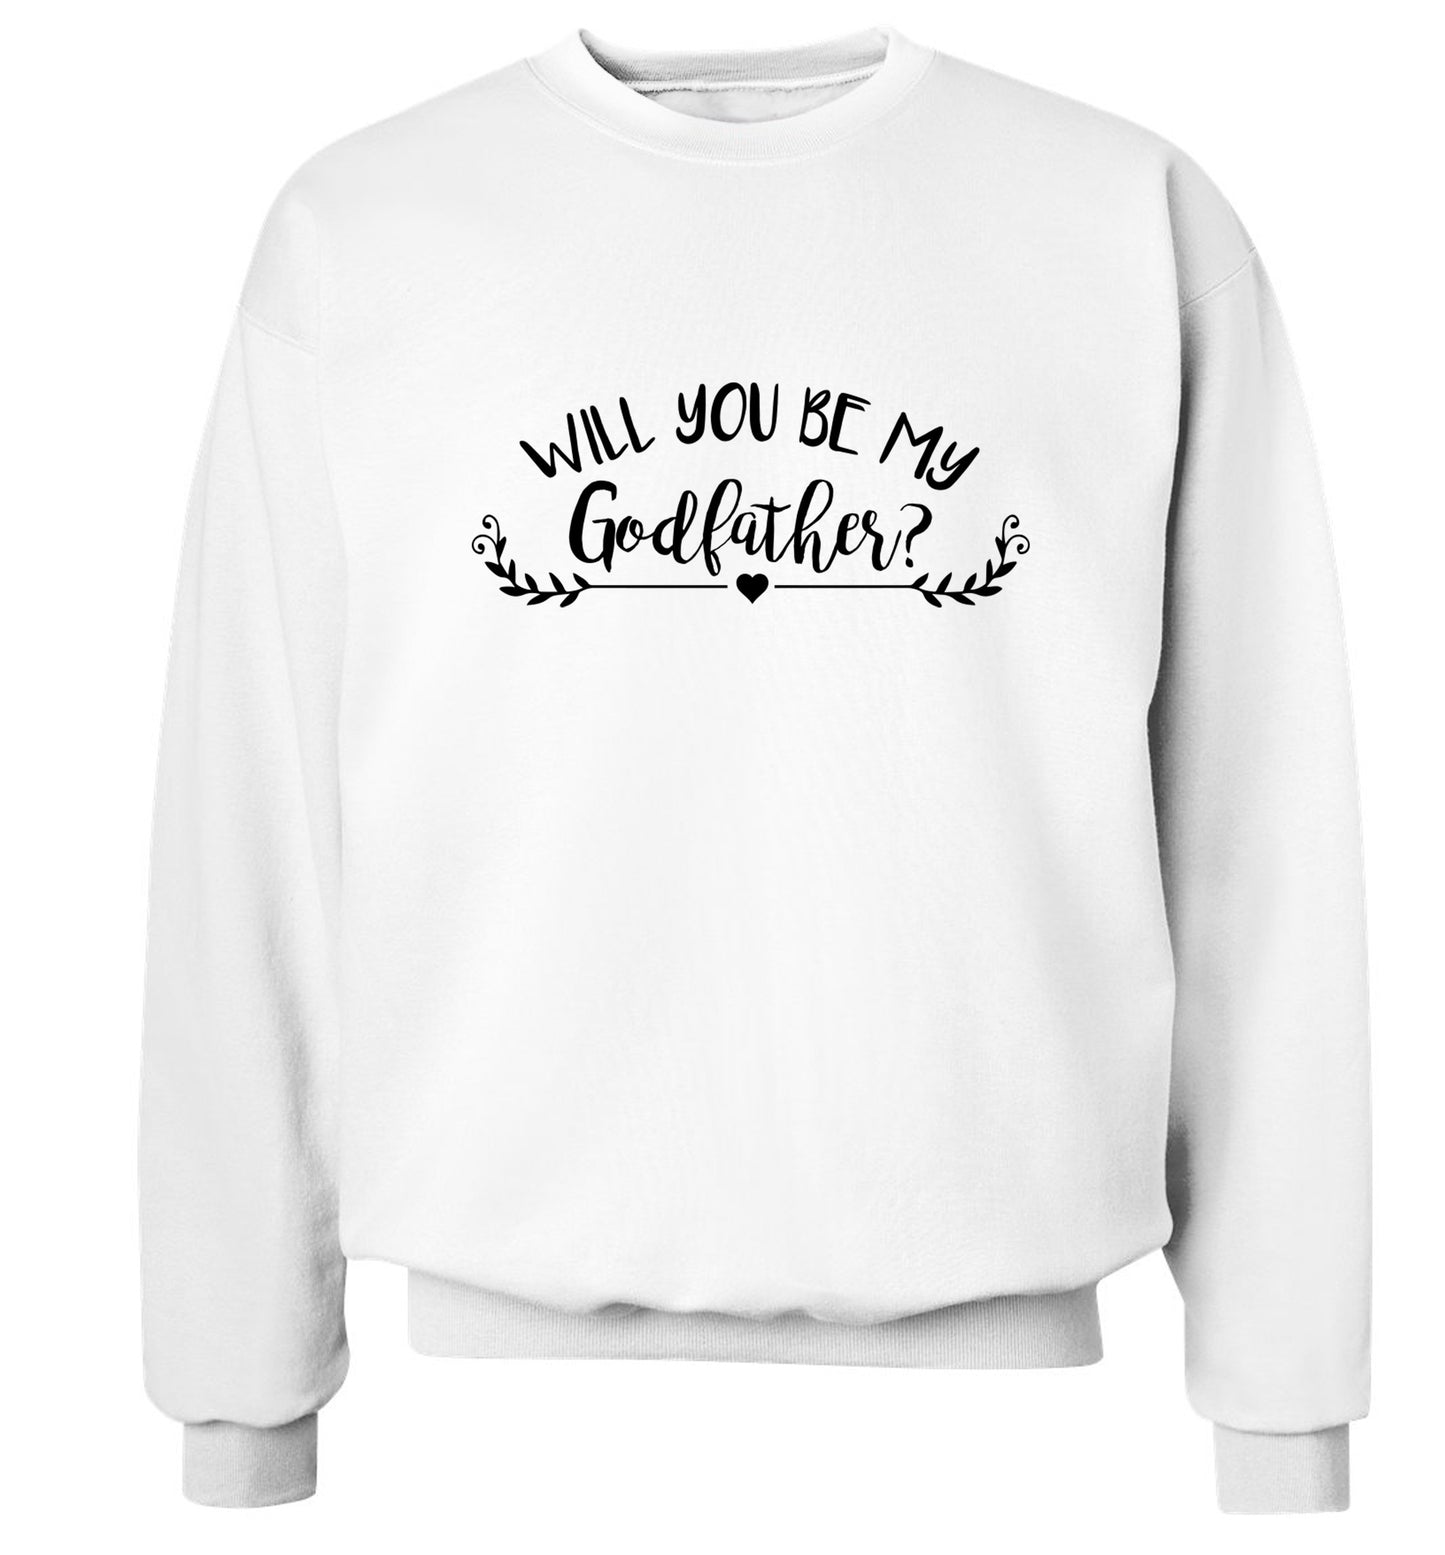 Will you be my godfather? Adult's unisex white Sweater 2XL